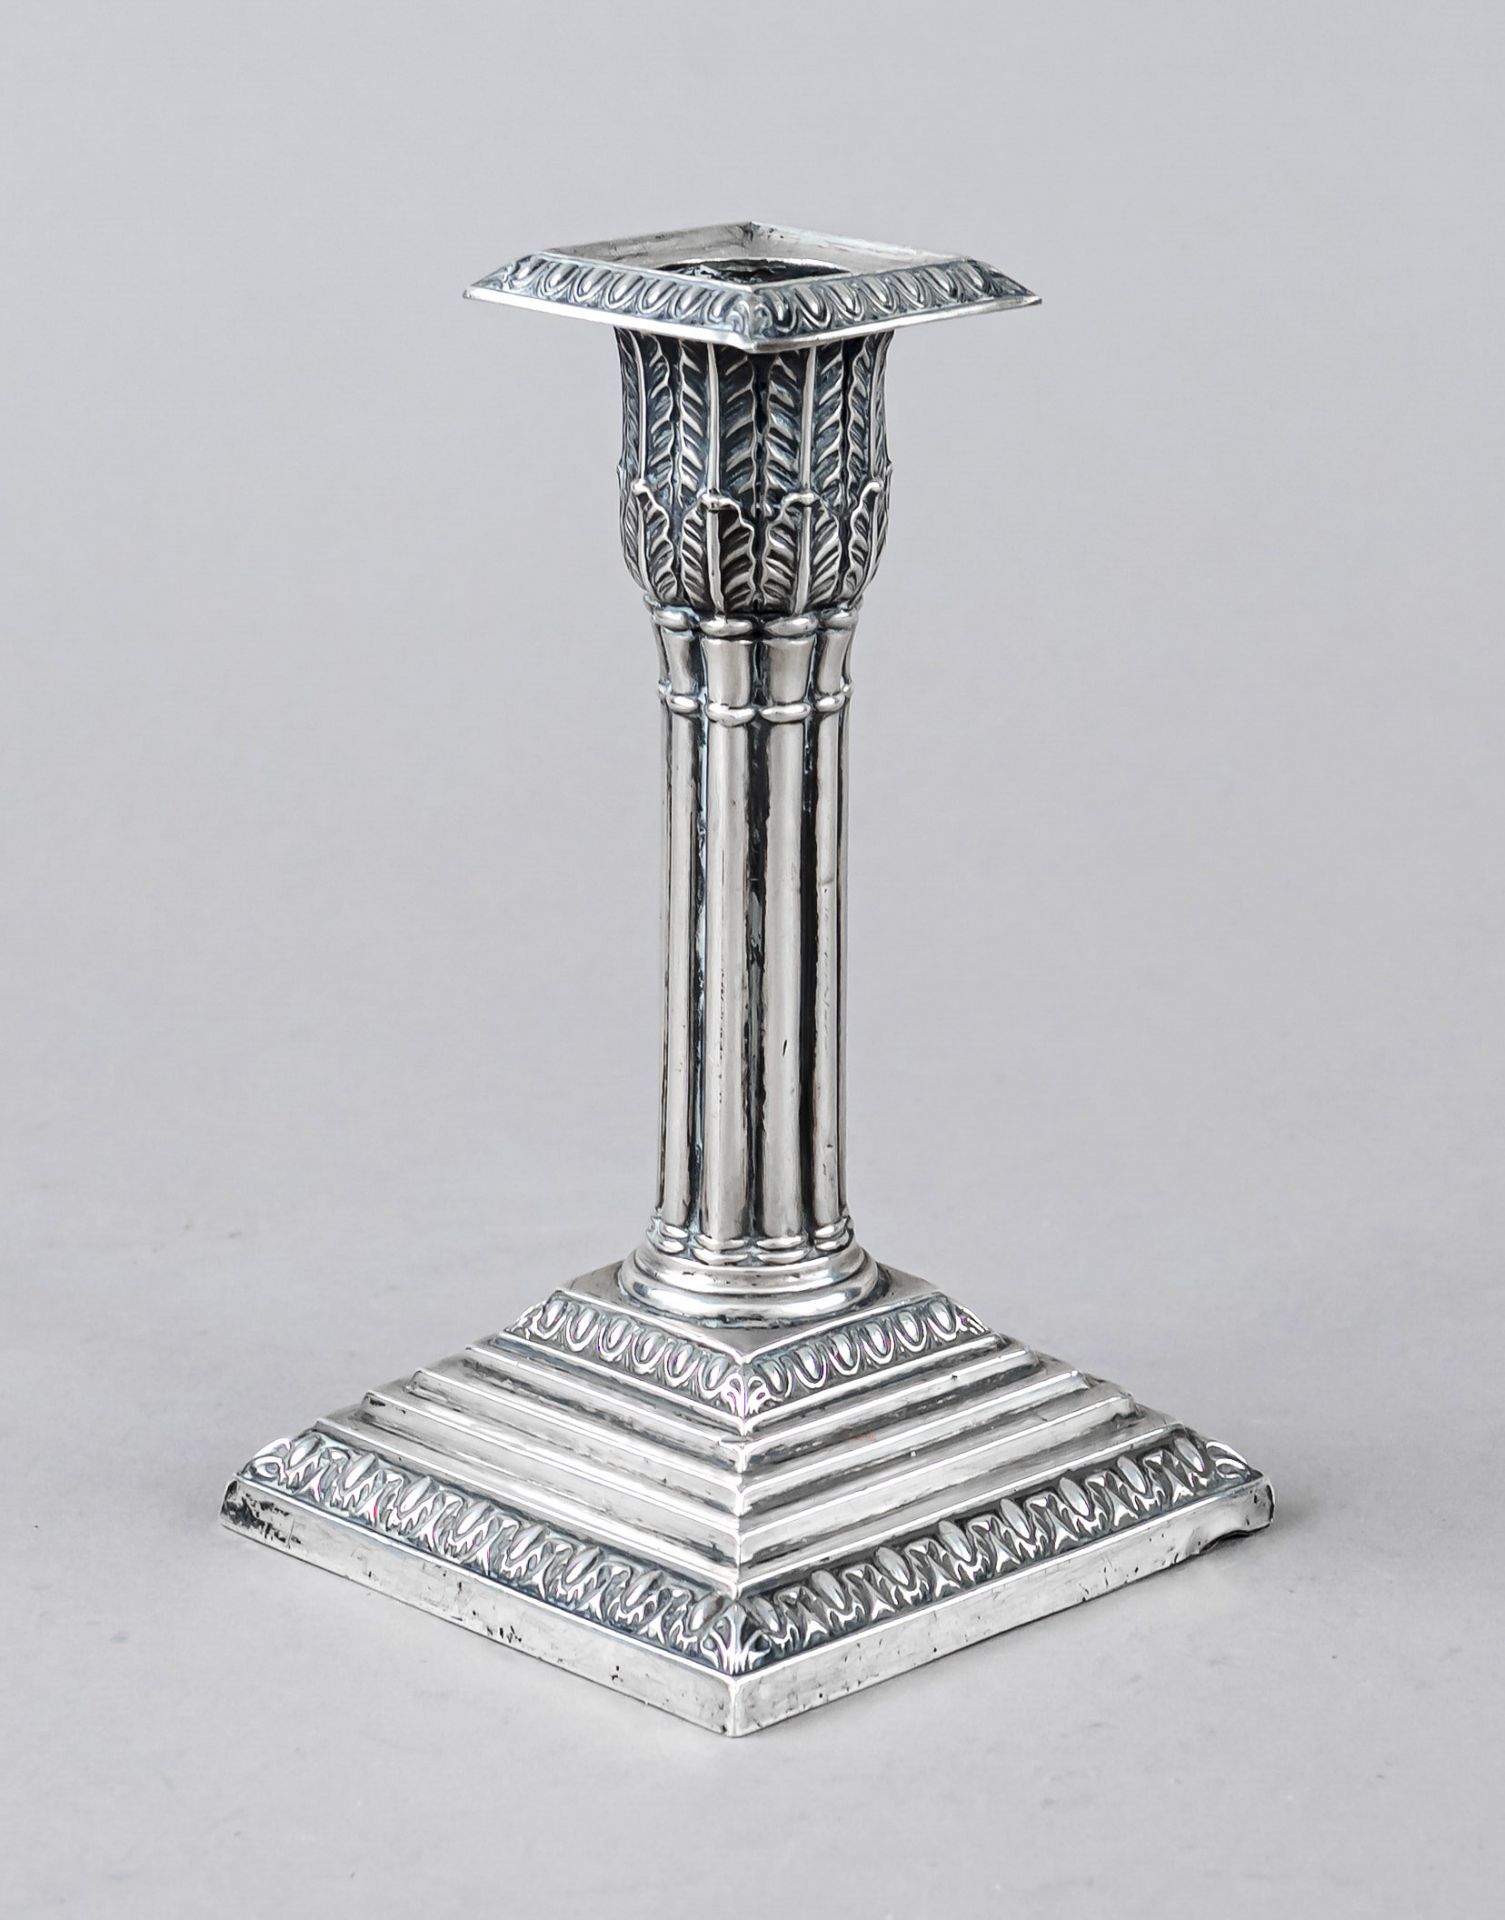 Candlestick, England, 1899, master's mark William Hutton & Sons Ltd, London, sterling silver 925/